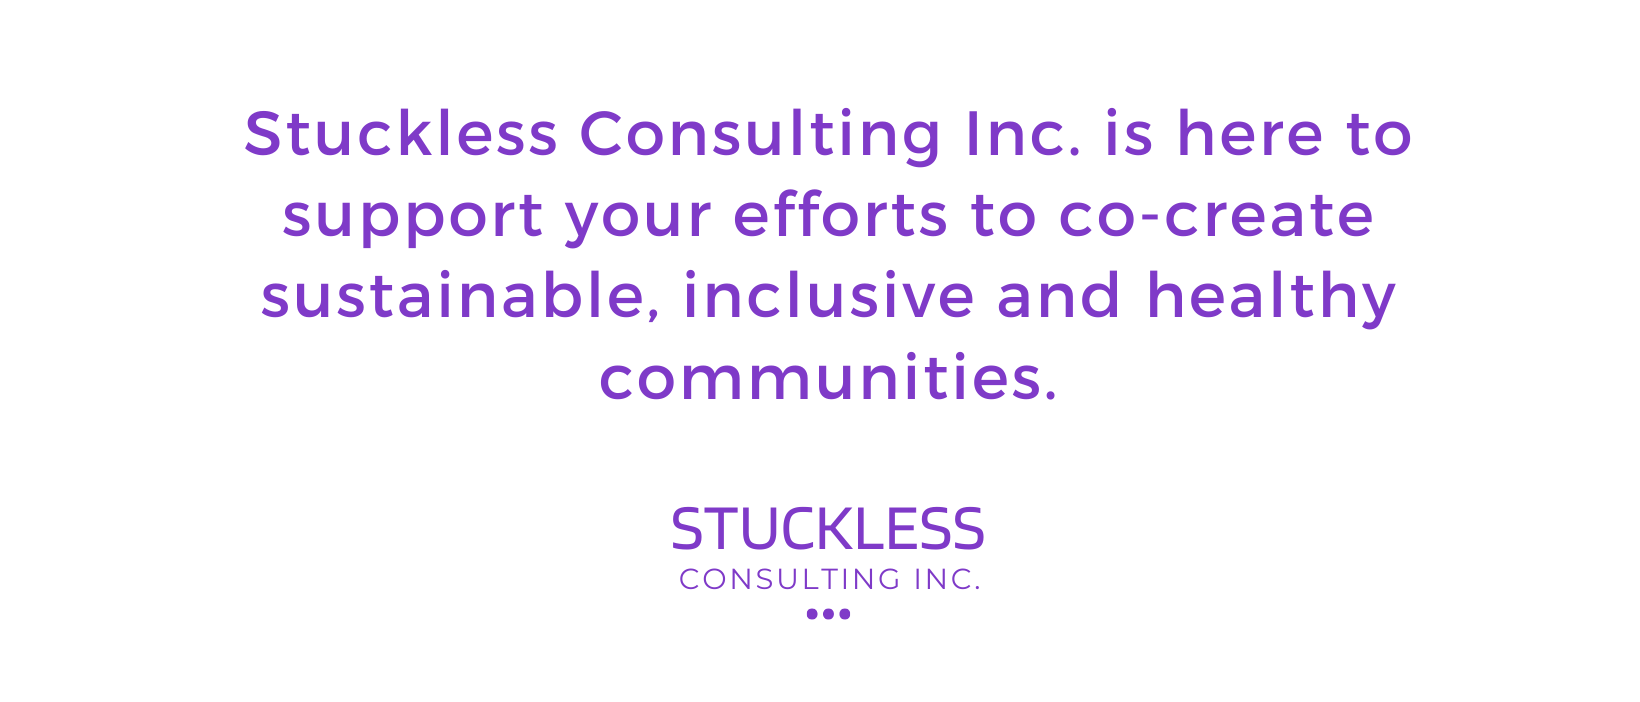 Purple text box that reads "Stuckless Consulting Inc. is here to support your efforts to co-create sustainable, inclusive, and healthy communities". The Stuckless Consulting Inc. logo is directly below the text.